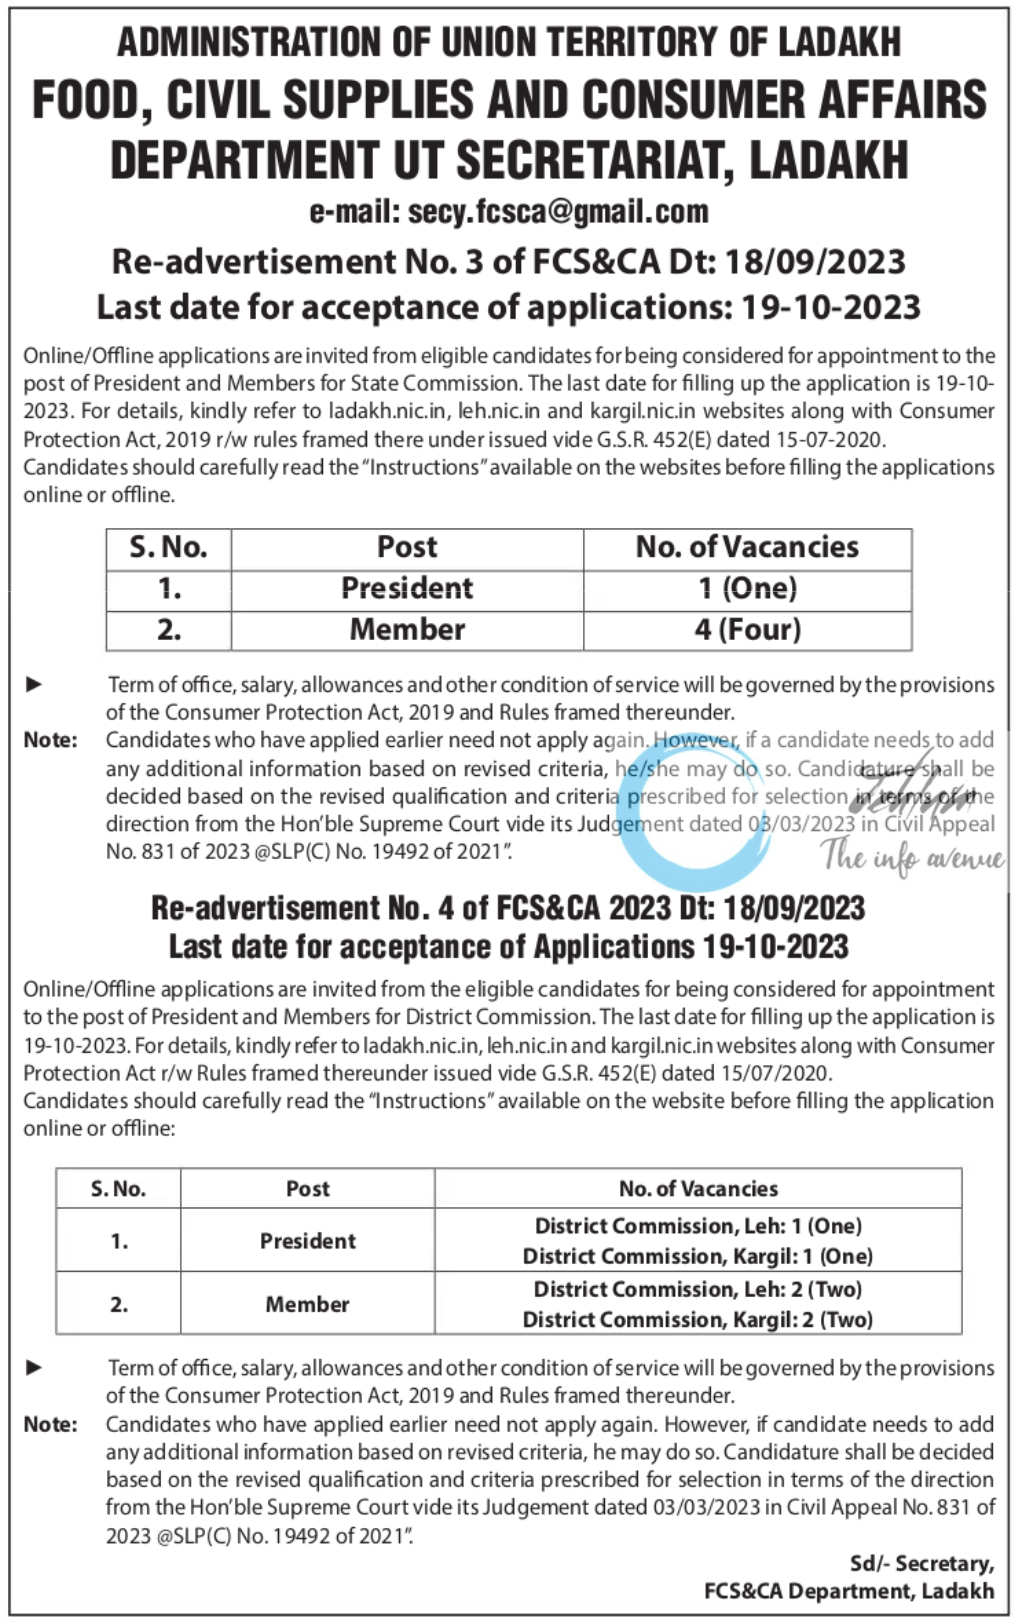 FOOD CIVIL SUPPLIES AND CONSUMER AFFAIRS LADAKH ADVERTISEMENT NOTIFICATION NO 03 OF 2023